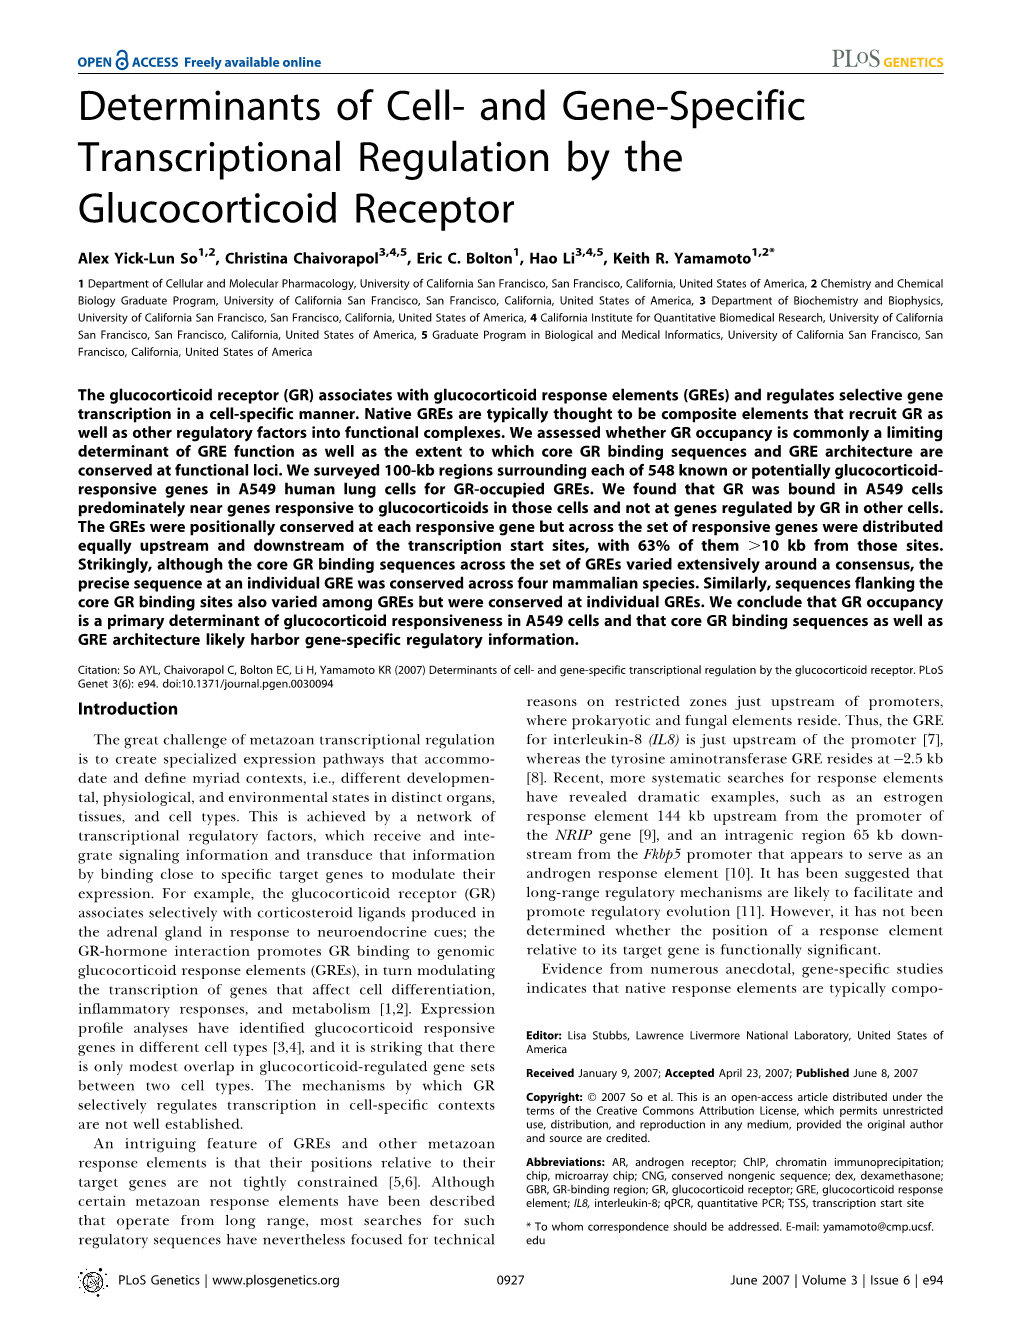 And Gene-Specific Transcriptional Regulation by the Glucocorticoid Receptor